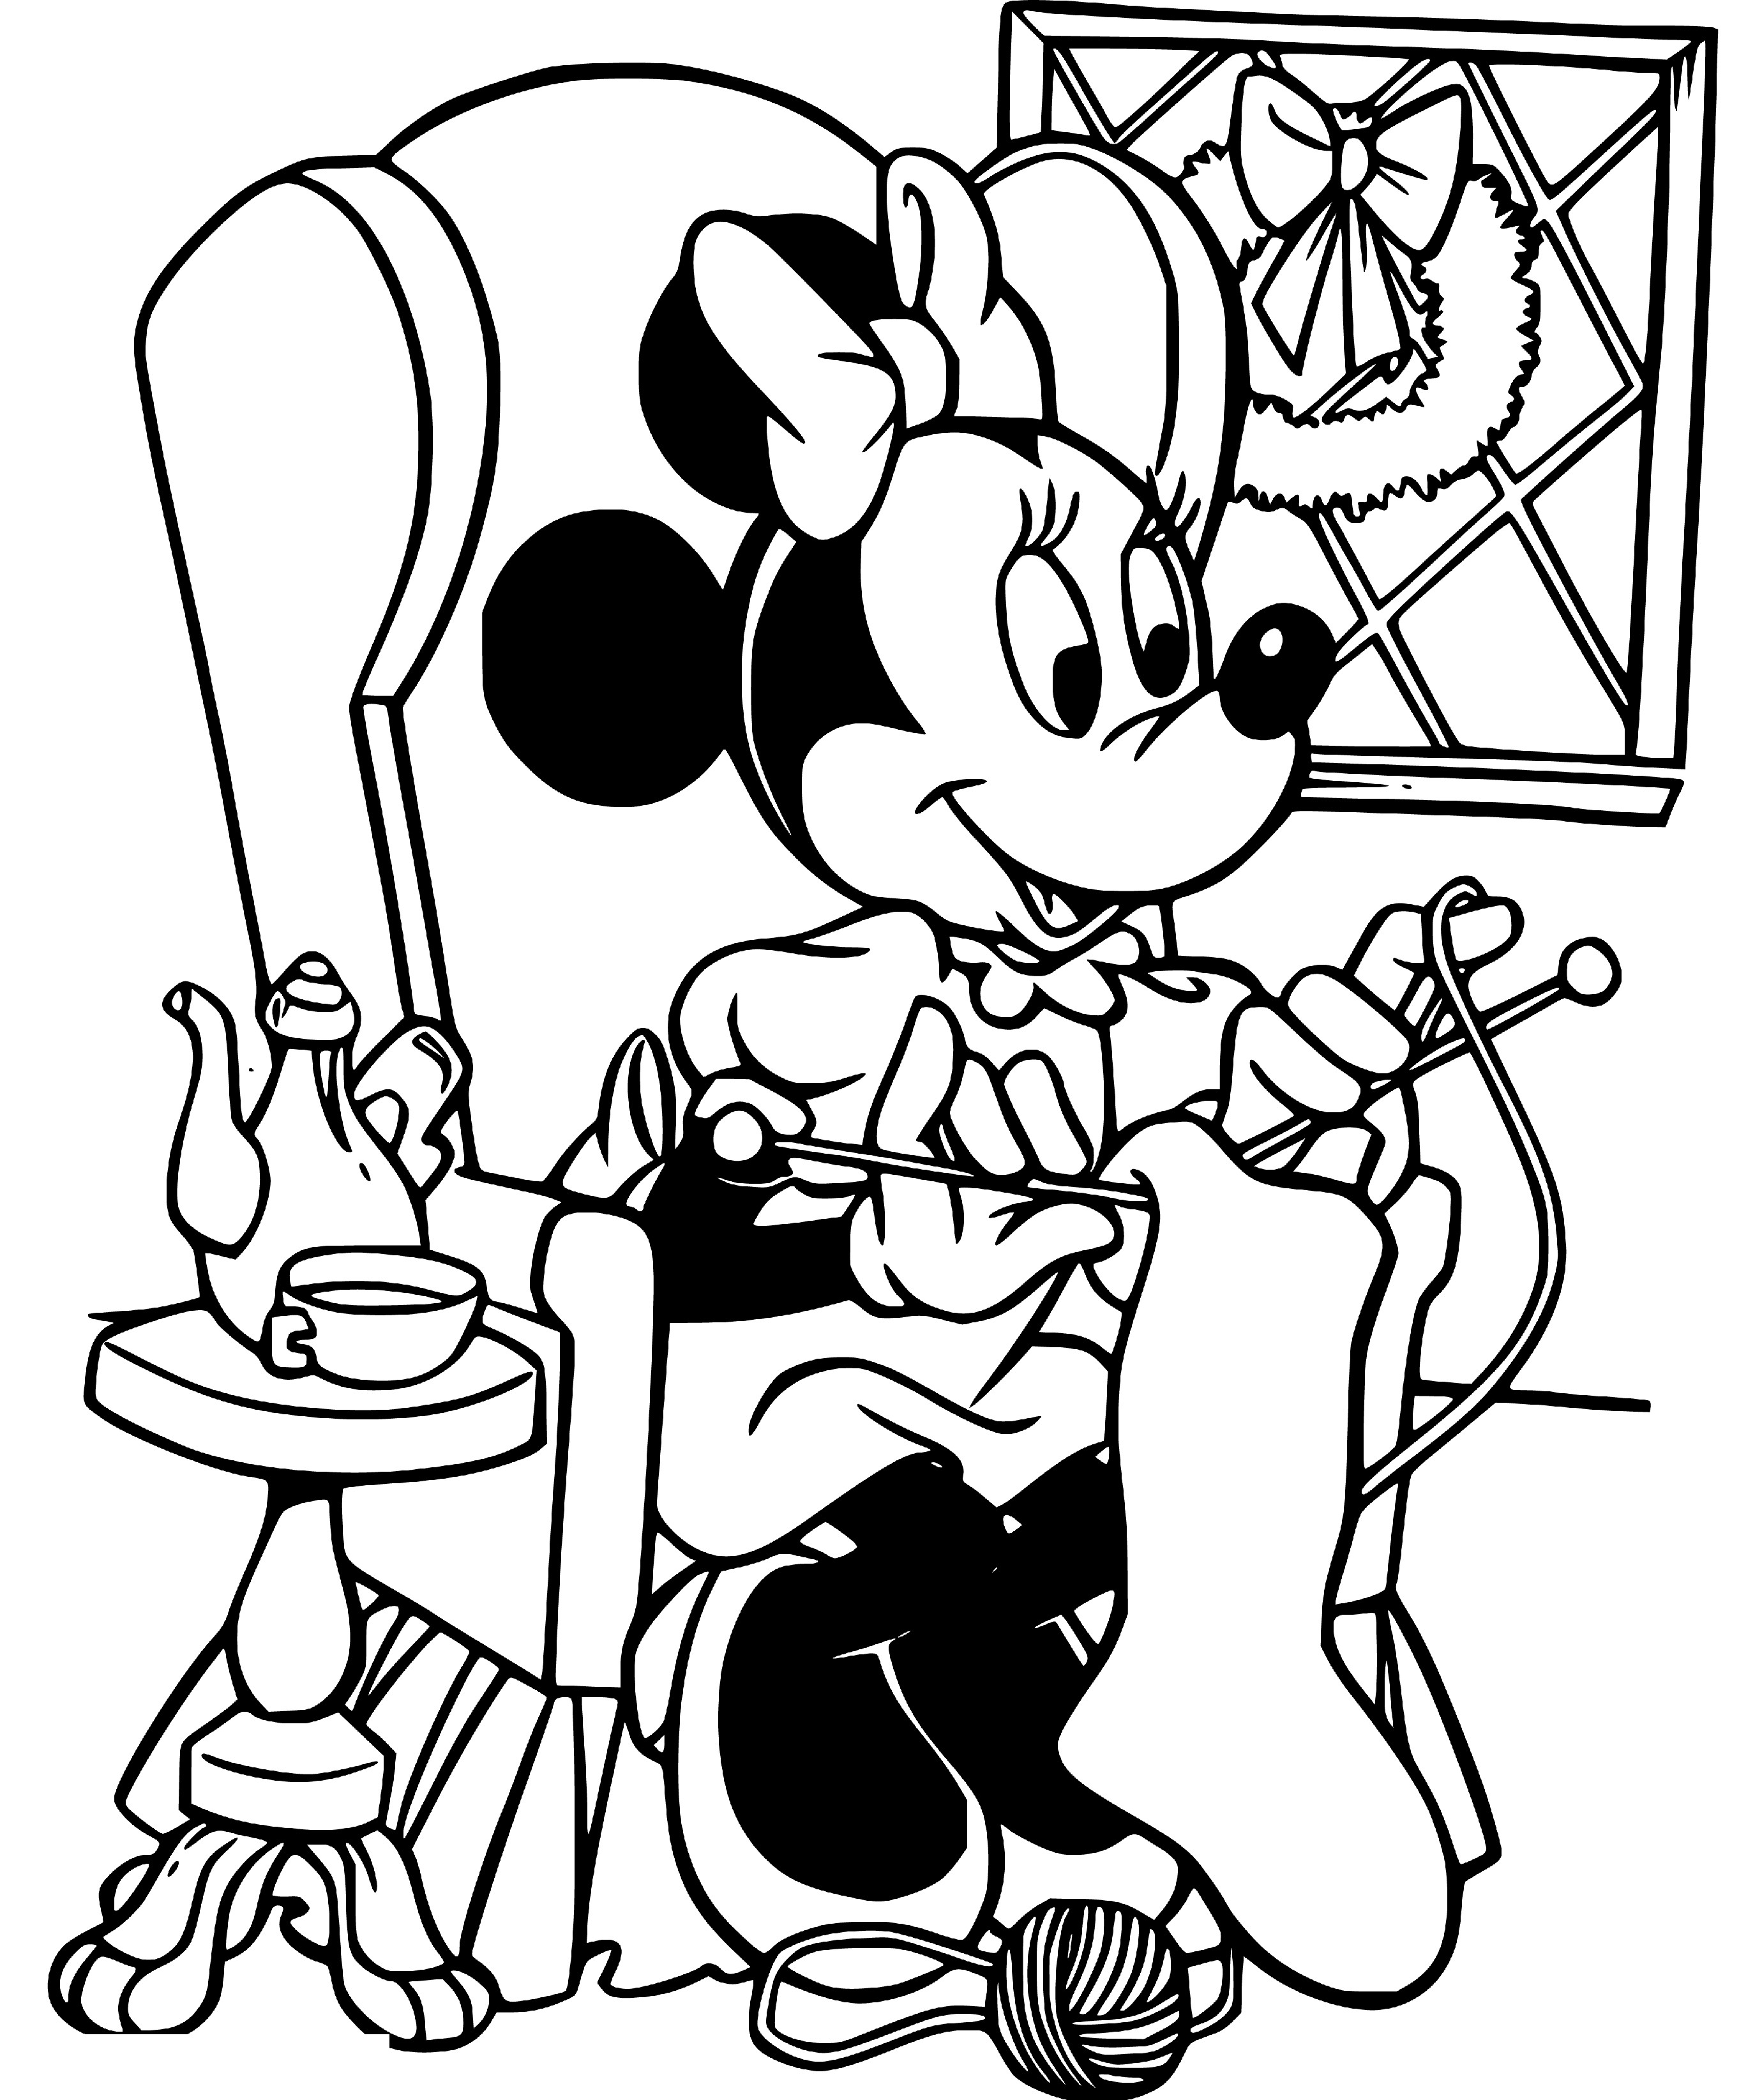 Minnie Mouse as Housewife Coloring Sheet for Kids - SheetalColor.com